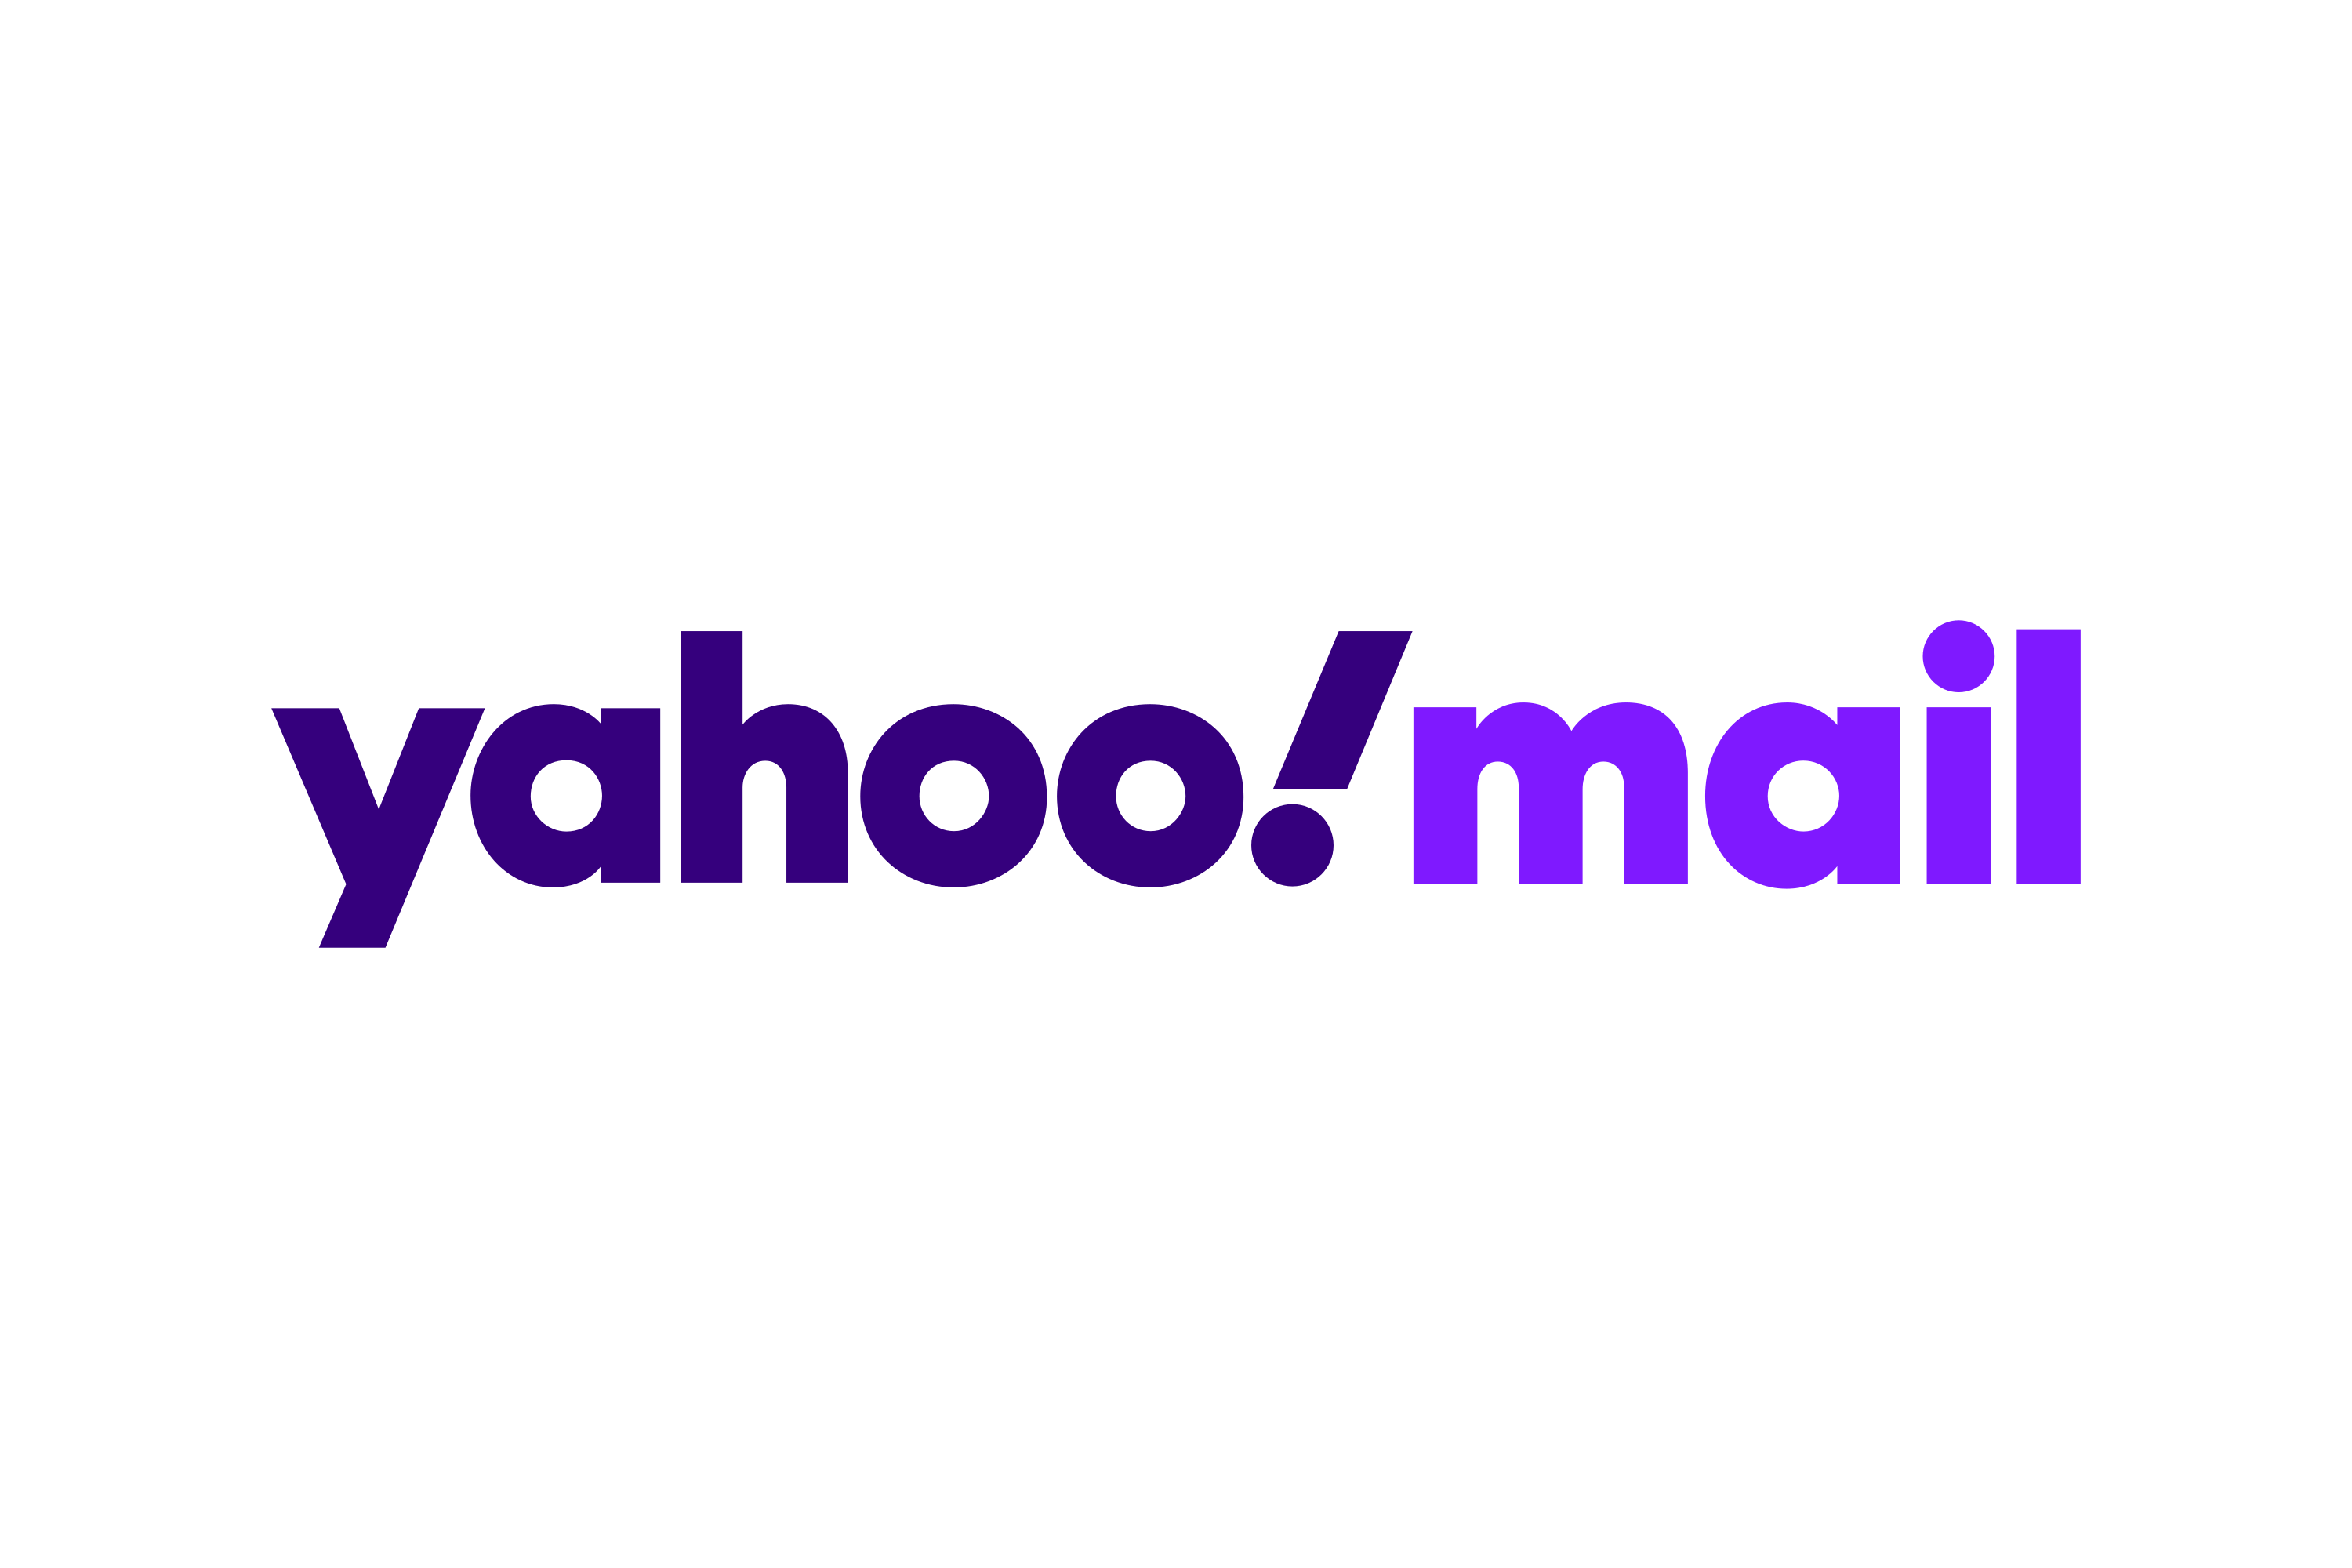 Download Yahoo Mail Logo In Svg Vector Or Png File Format   Logo.wine - Yahoo, Transparent background PNG HD thumbnail